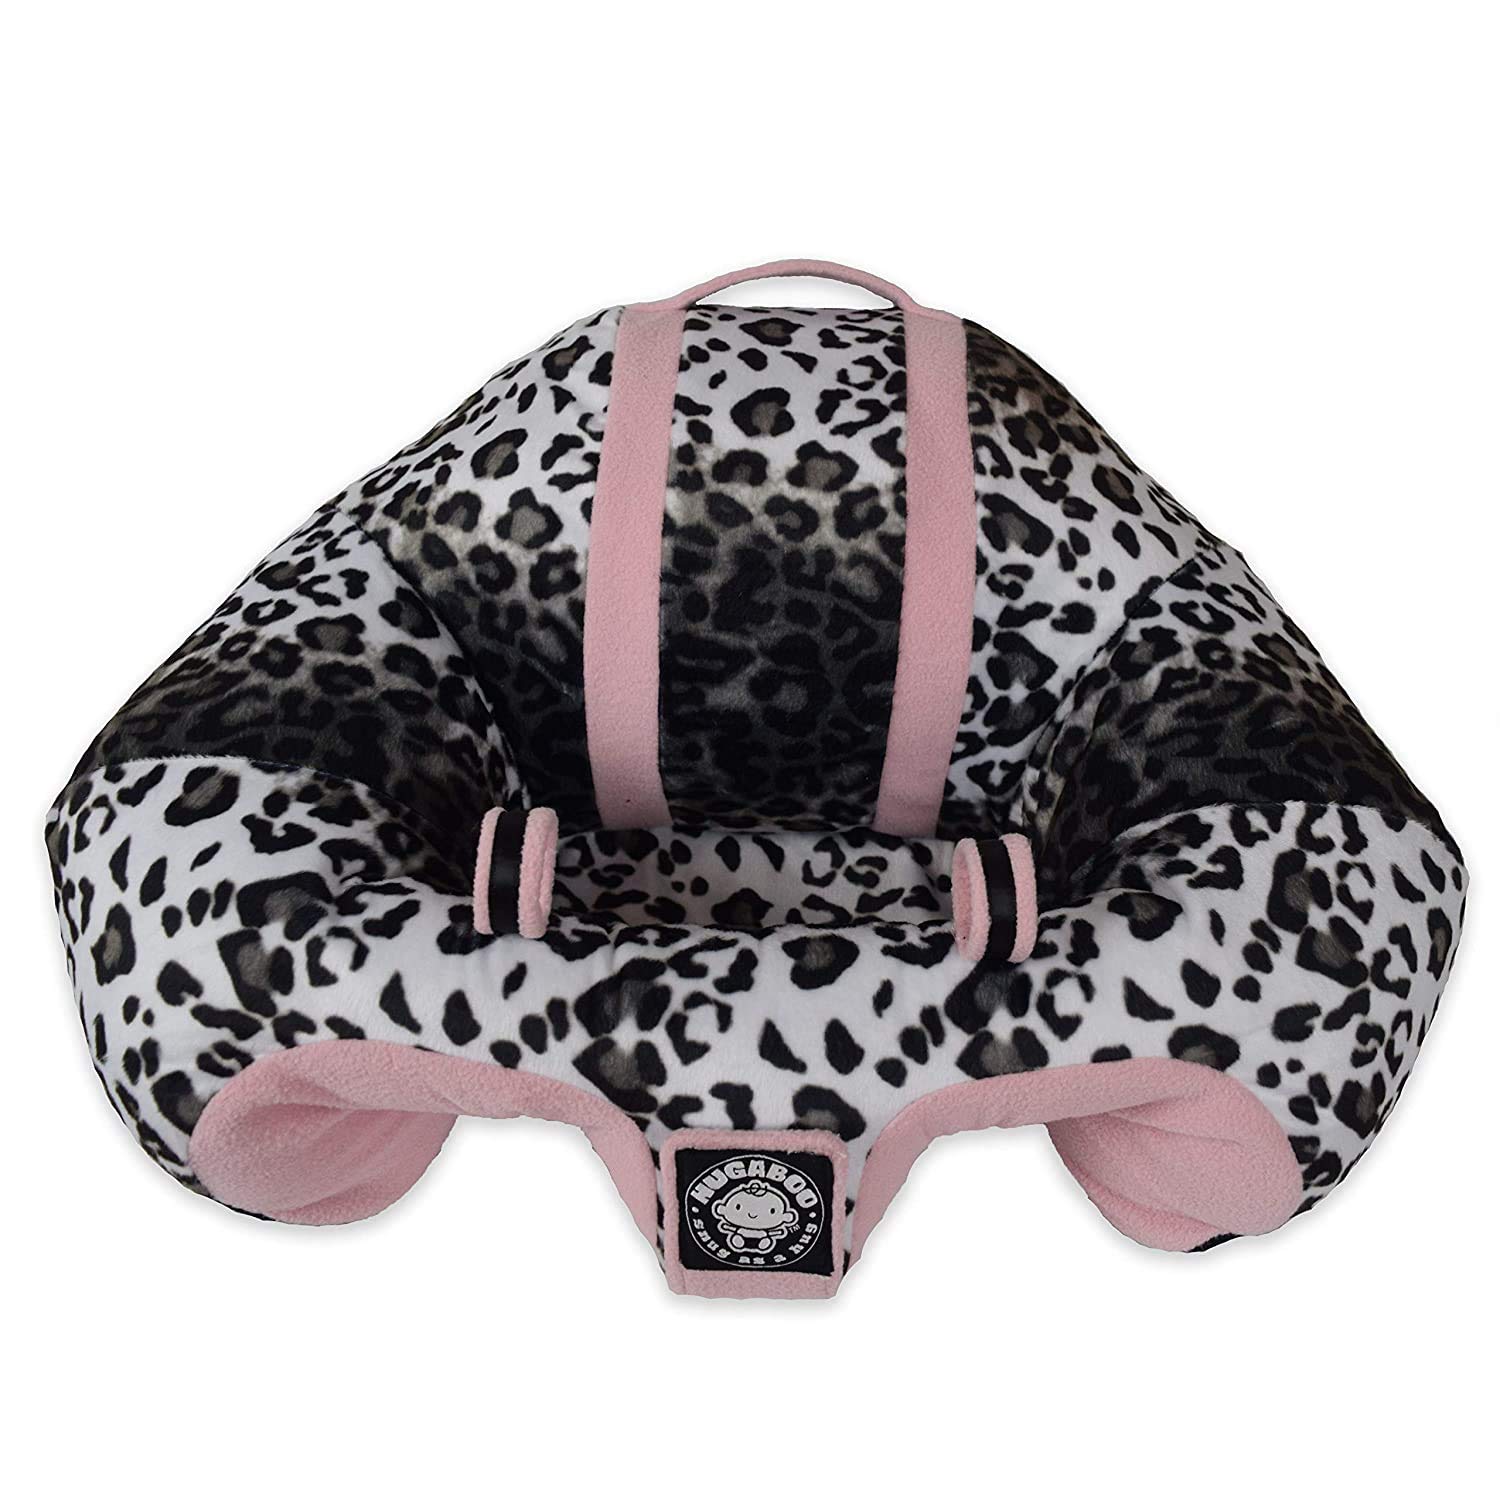 The Original Hugaboo Infant Sitting Chair | 2nd Edition | Pink Snow Leopard